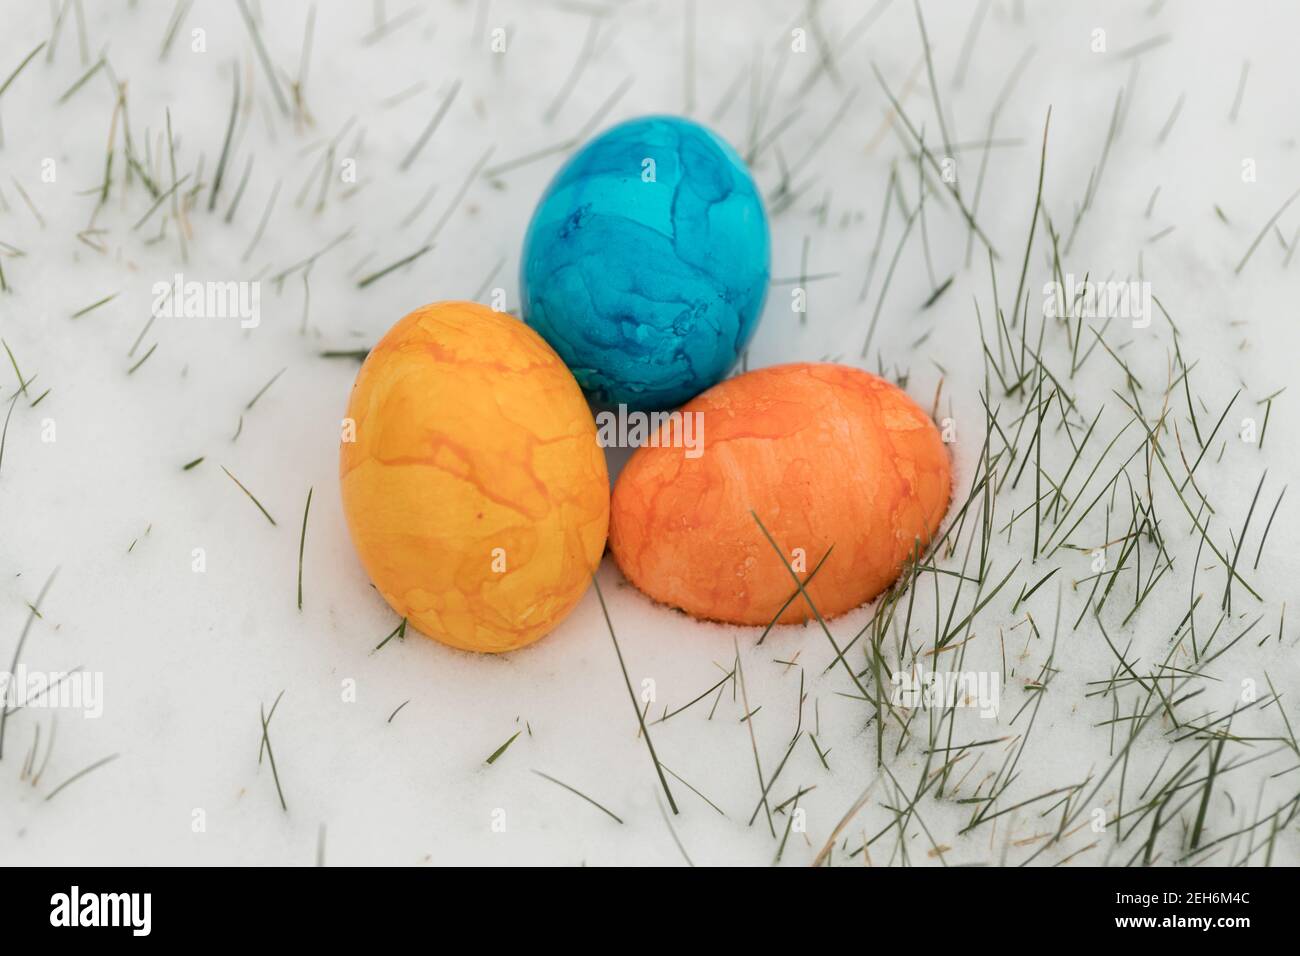 close-up of three colorful easter eggs in the snow with little blade of grass Stock Photo